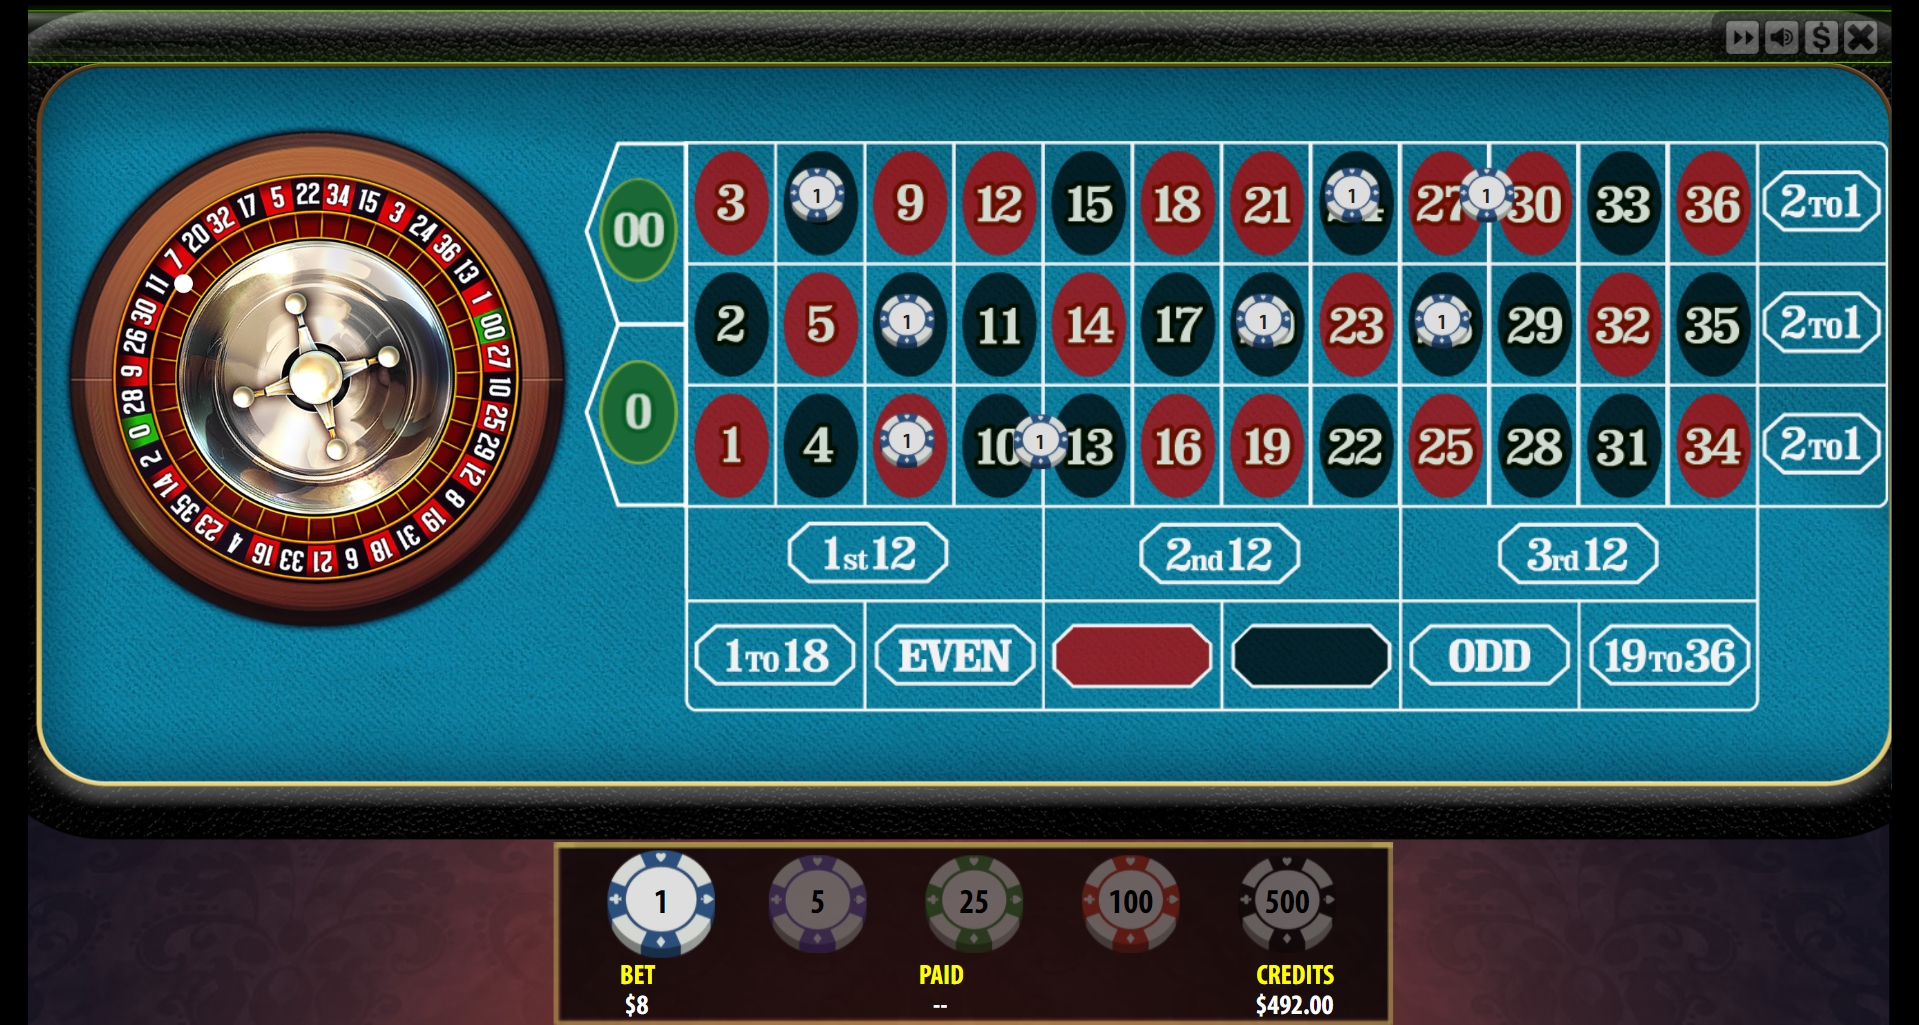 Just Bet Casino Mobile Casino Games Review